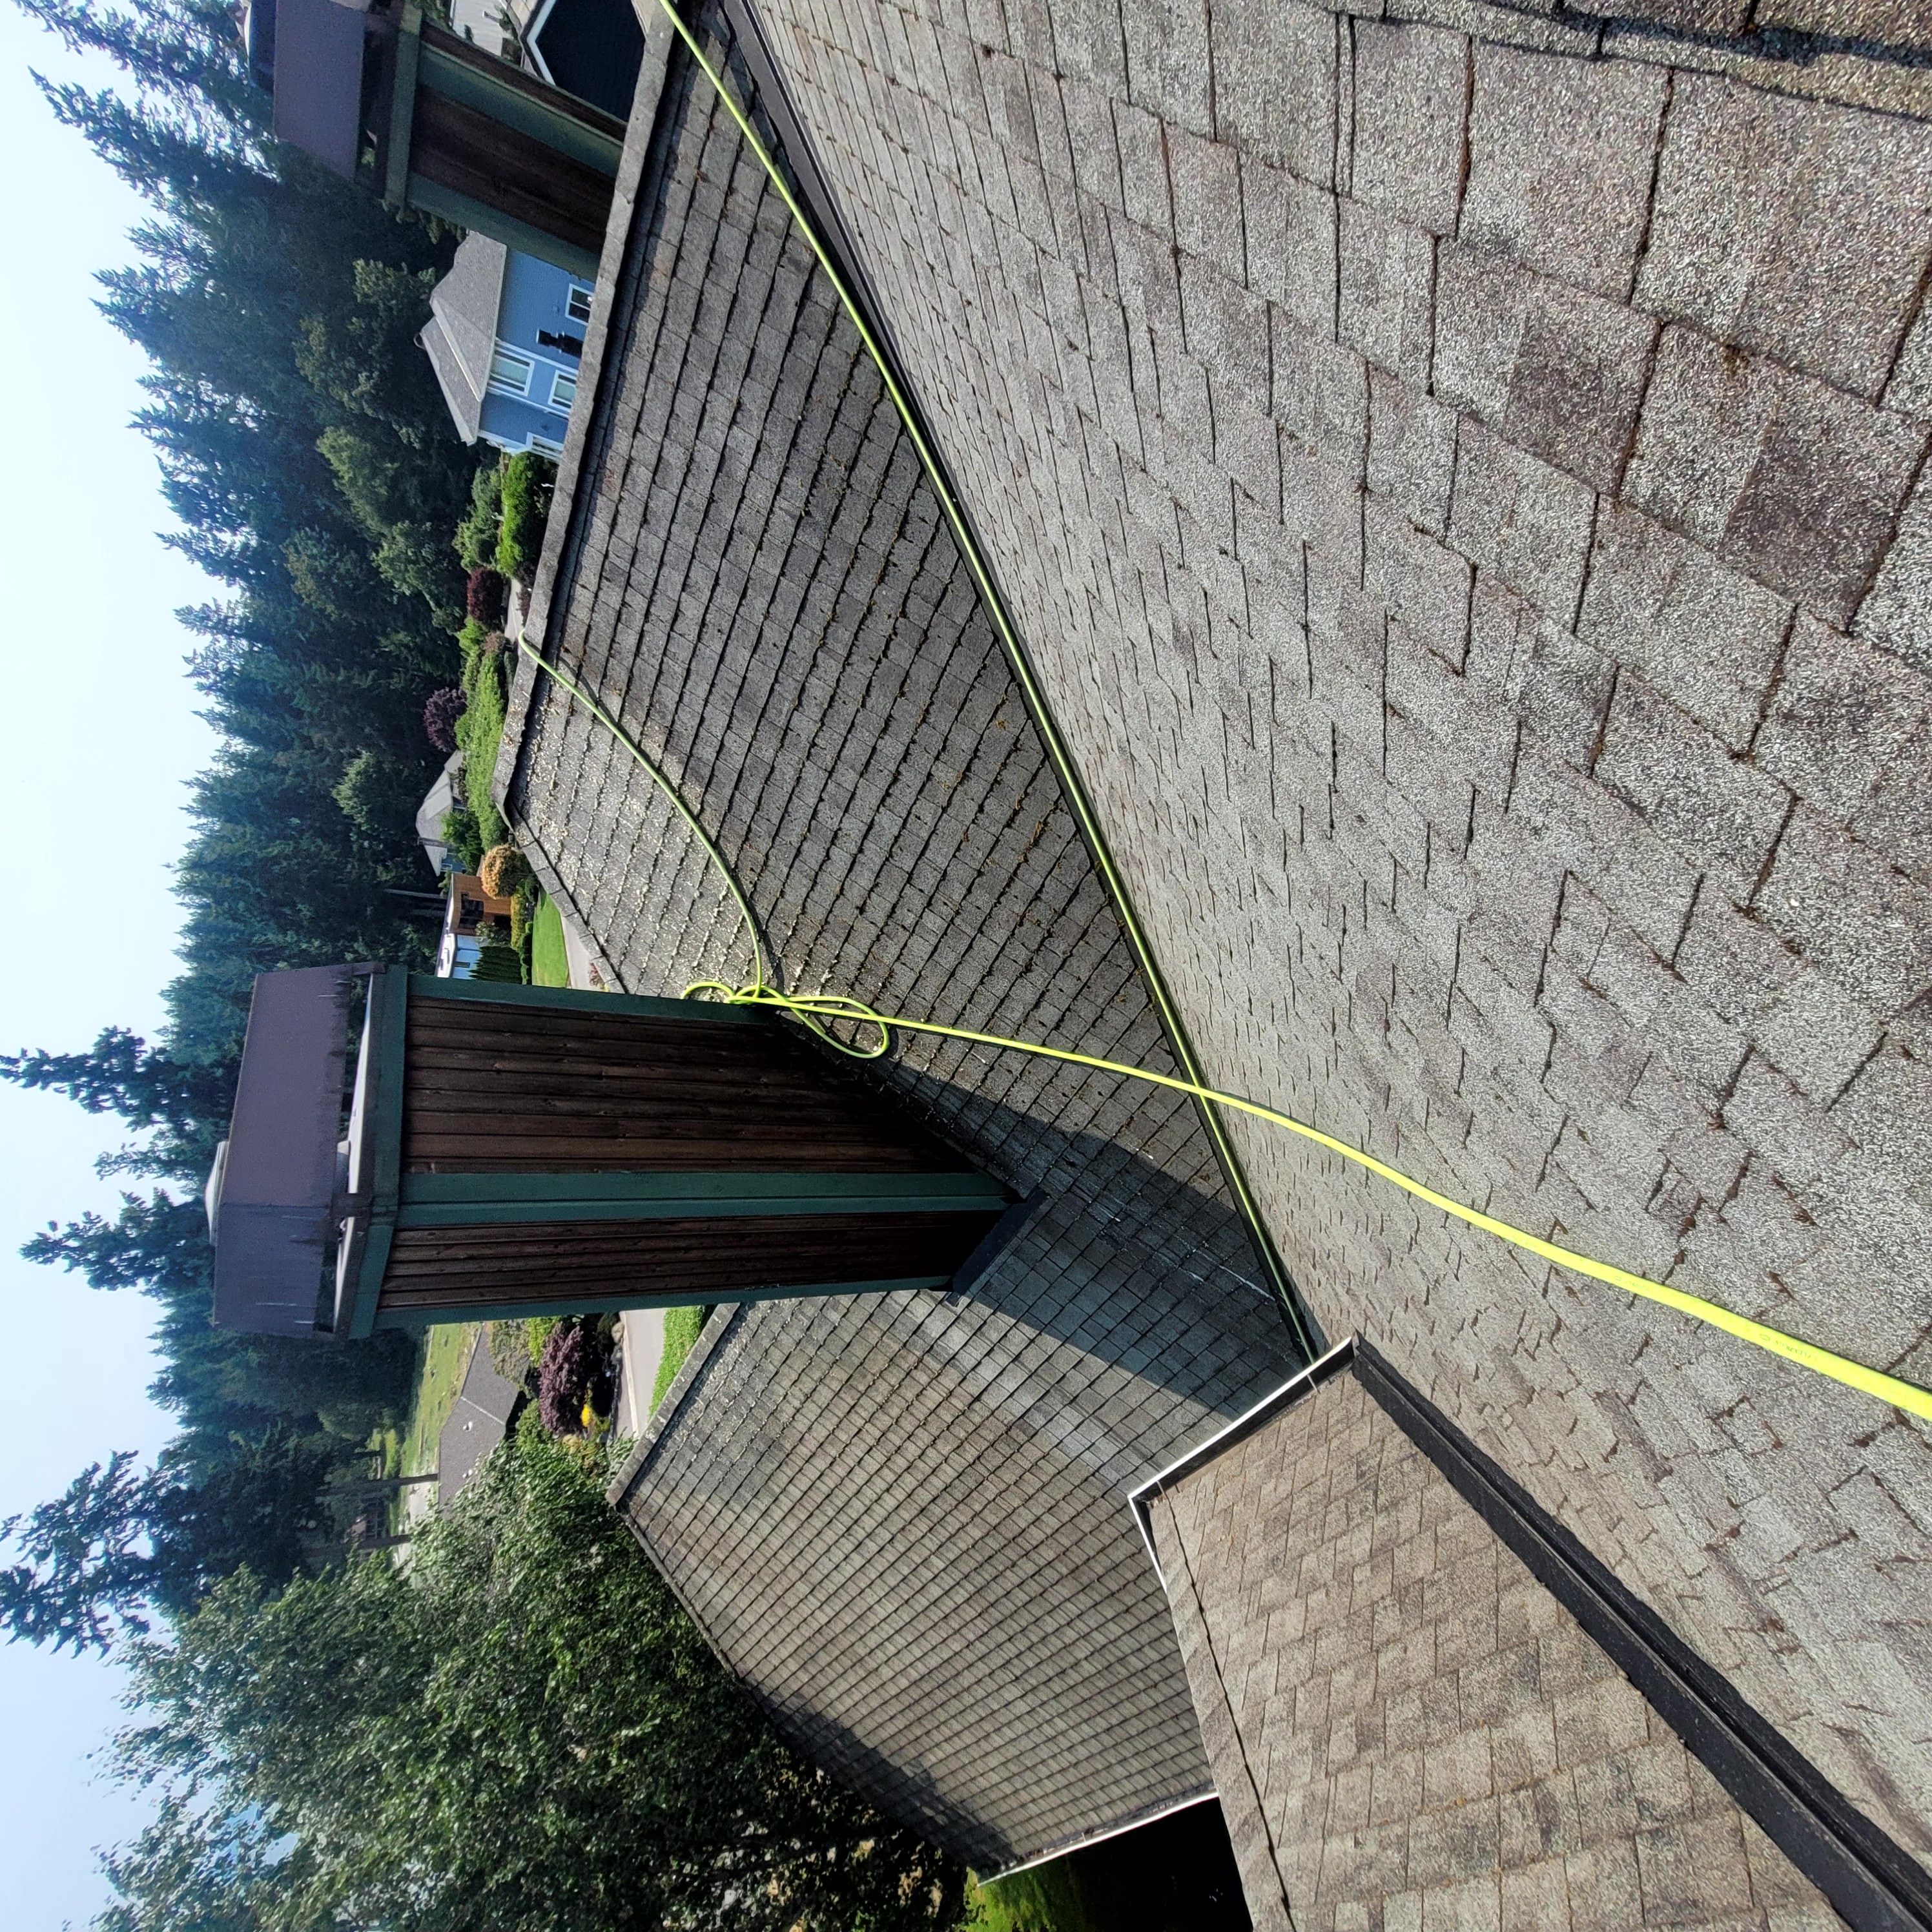 Moss Removal and Roof Cleaning in Bainbridge Island, WA